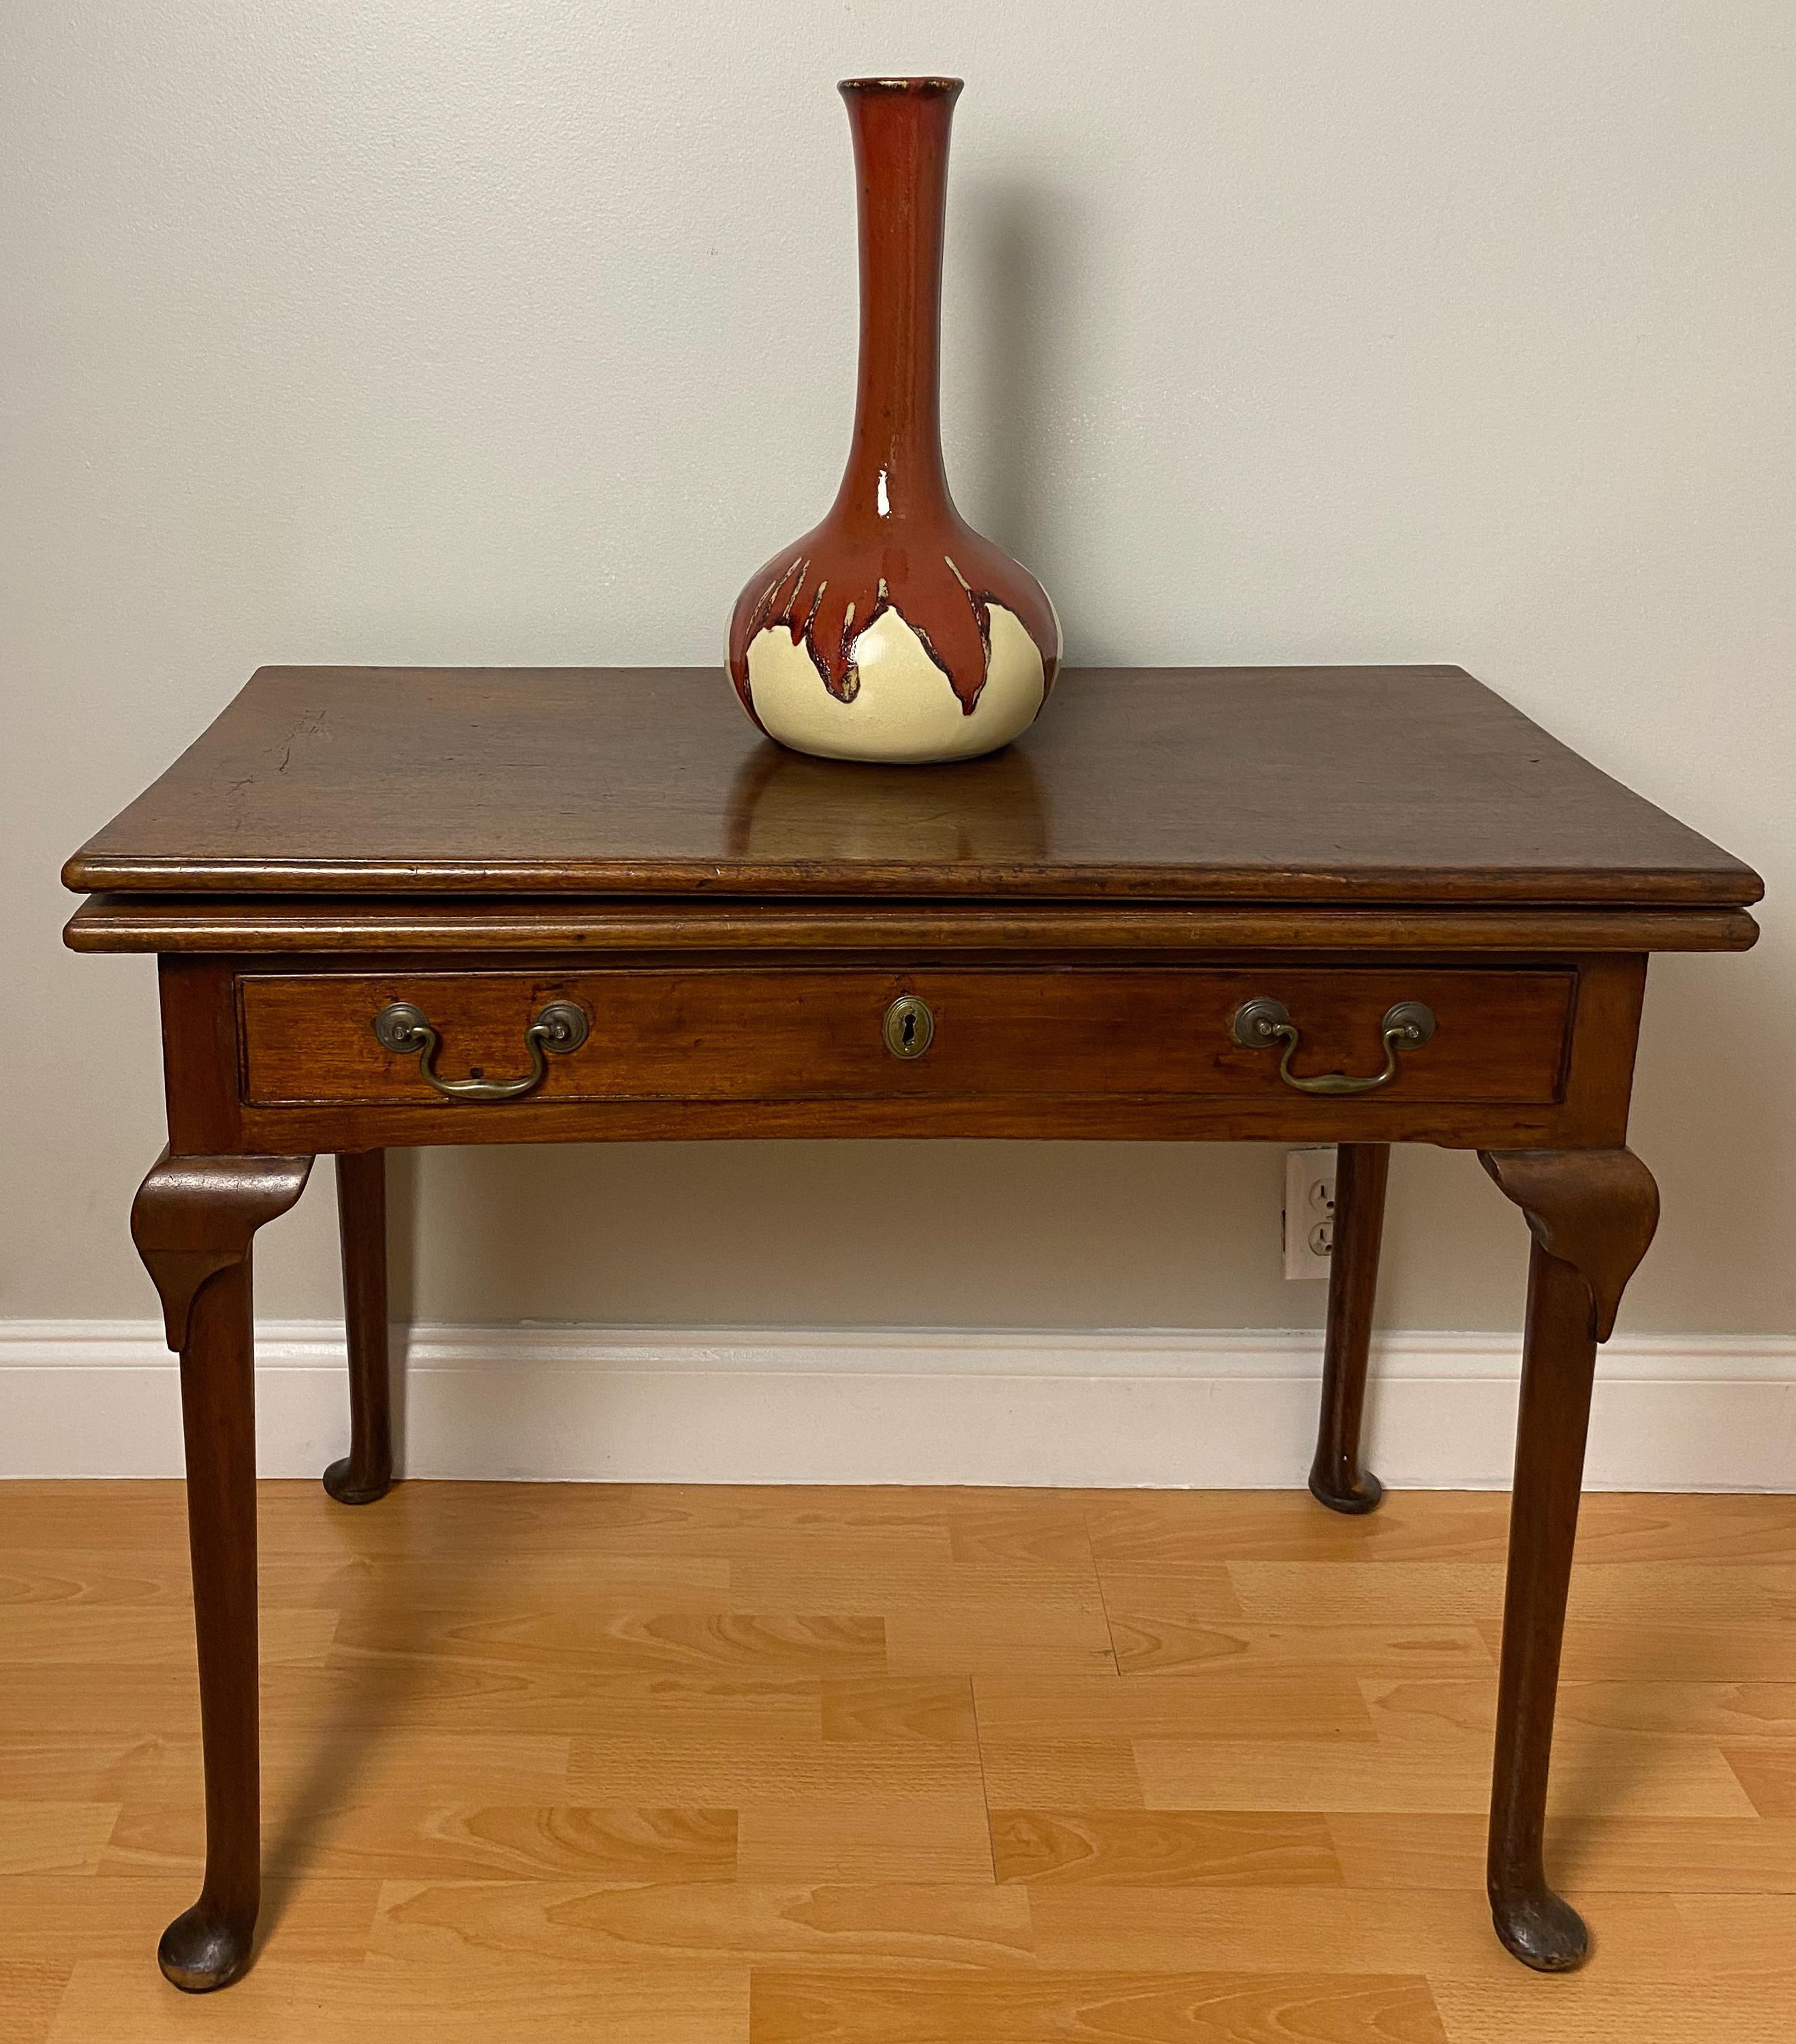 A fine early American Federal Chippendale style mahogany card table with rectangular flip top bearing a molded edge. The top is supported by a frieze drawer with period brass pull. Makes a wonderful entry or console table.

A gate leg opens to